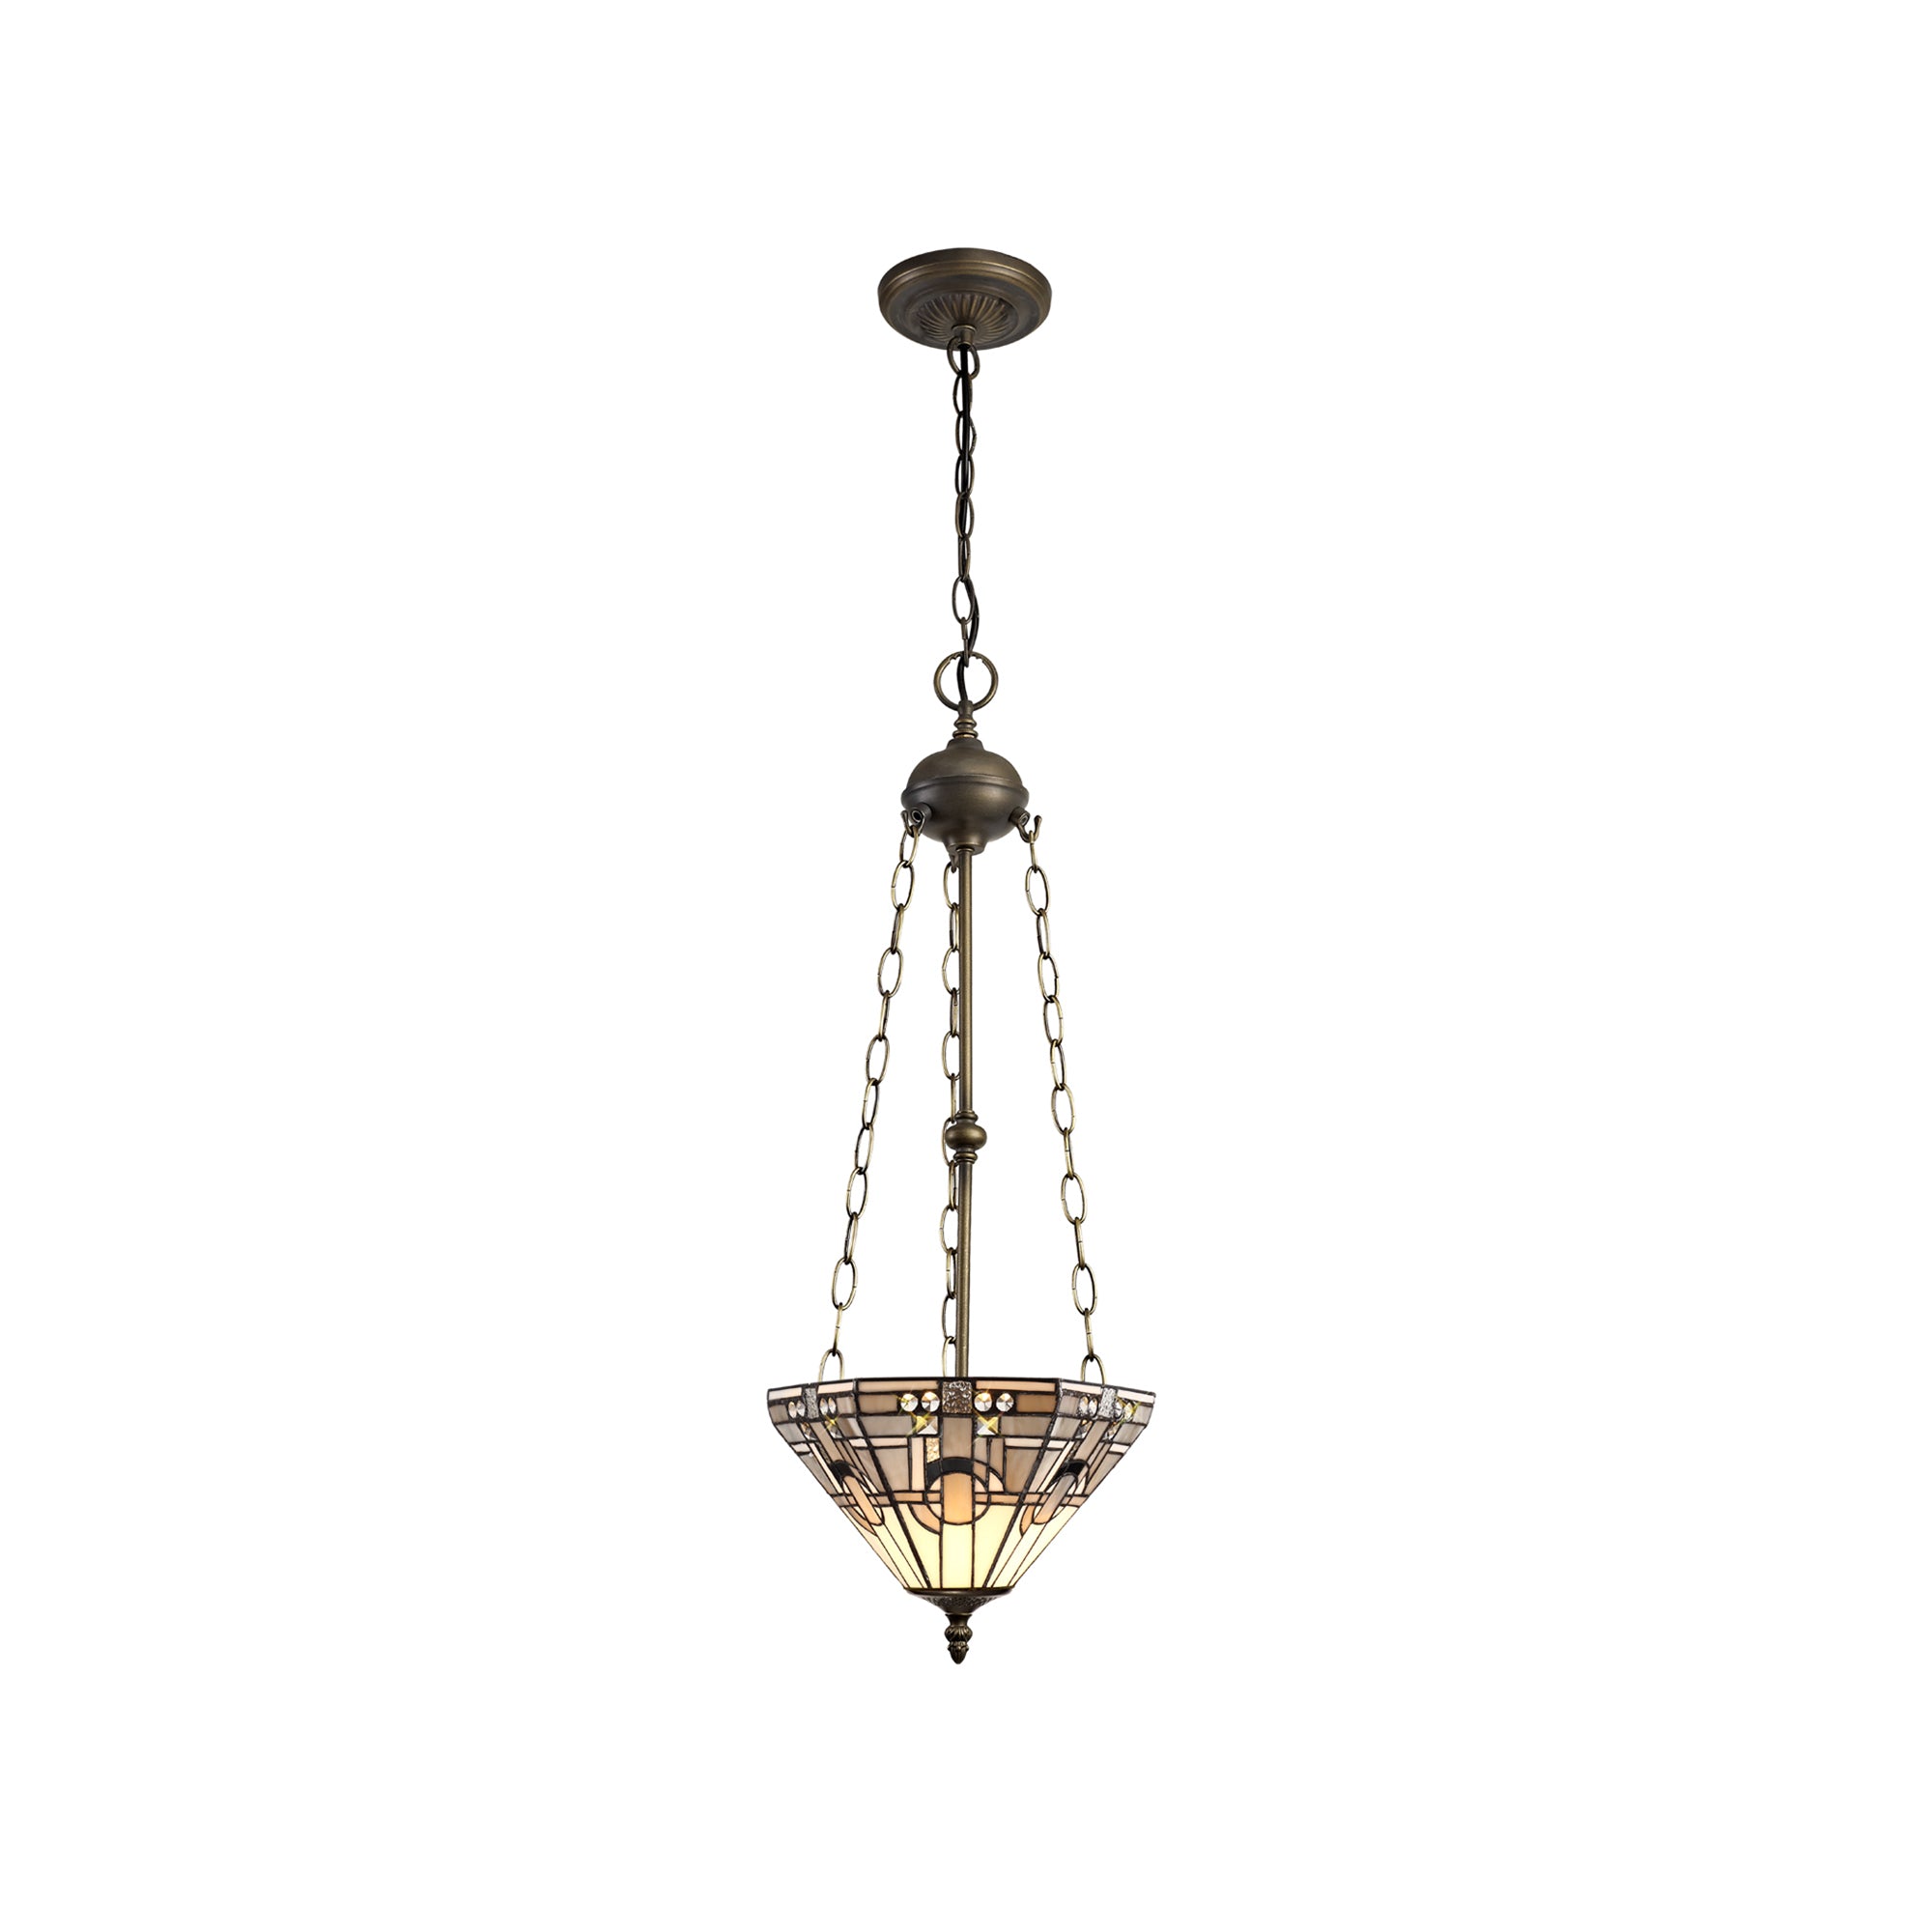 Atek 3 Light Uplighter Pendant E27 With 30cm Tiffany Shade, White/Grey/Black/Clear Crystal/Aged Antique Brass